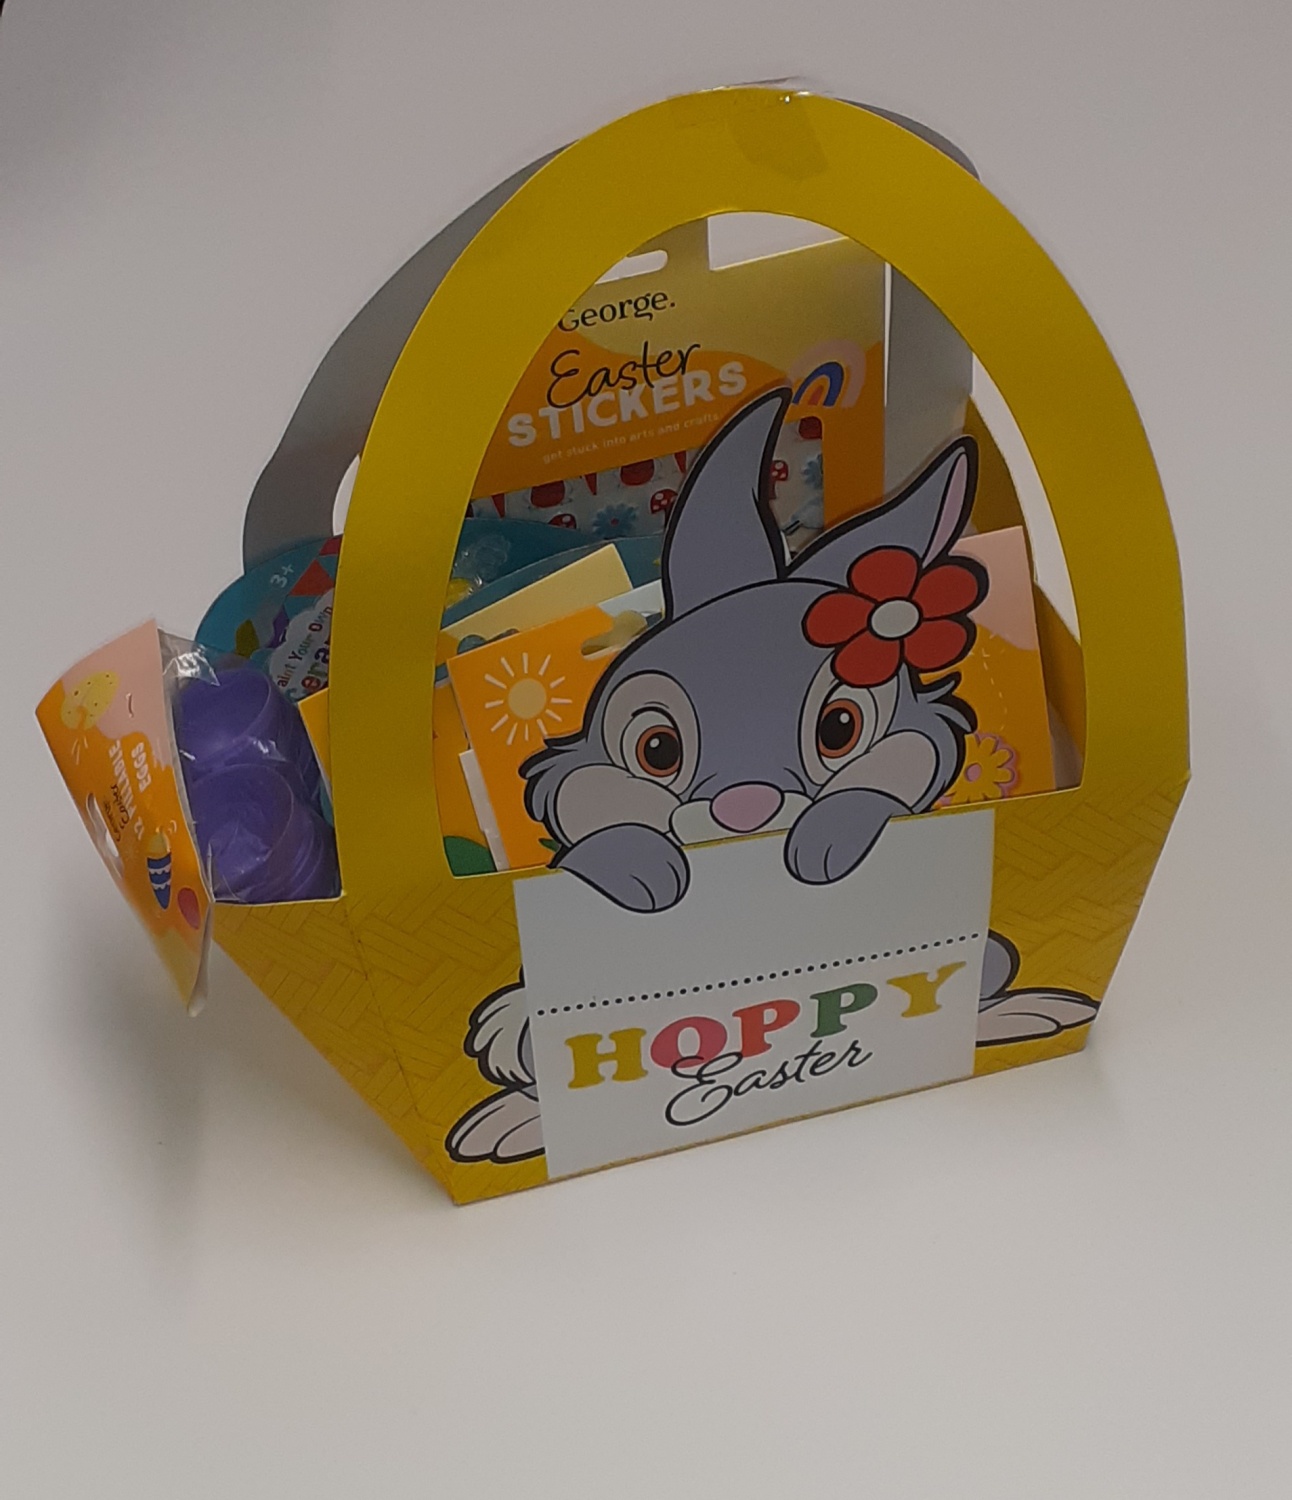 George Hoppy Easter Childs Design & Decorating Gift Bundle RRP 11.99 CLEARANCE XL 4.99